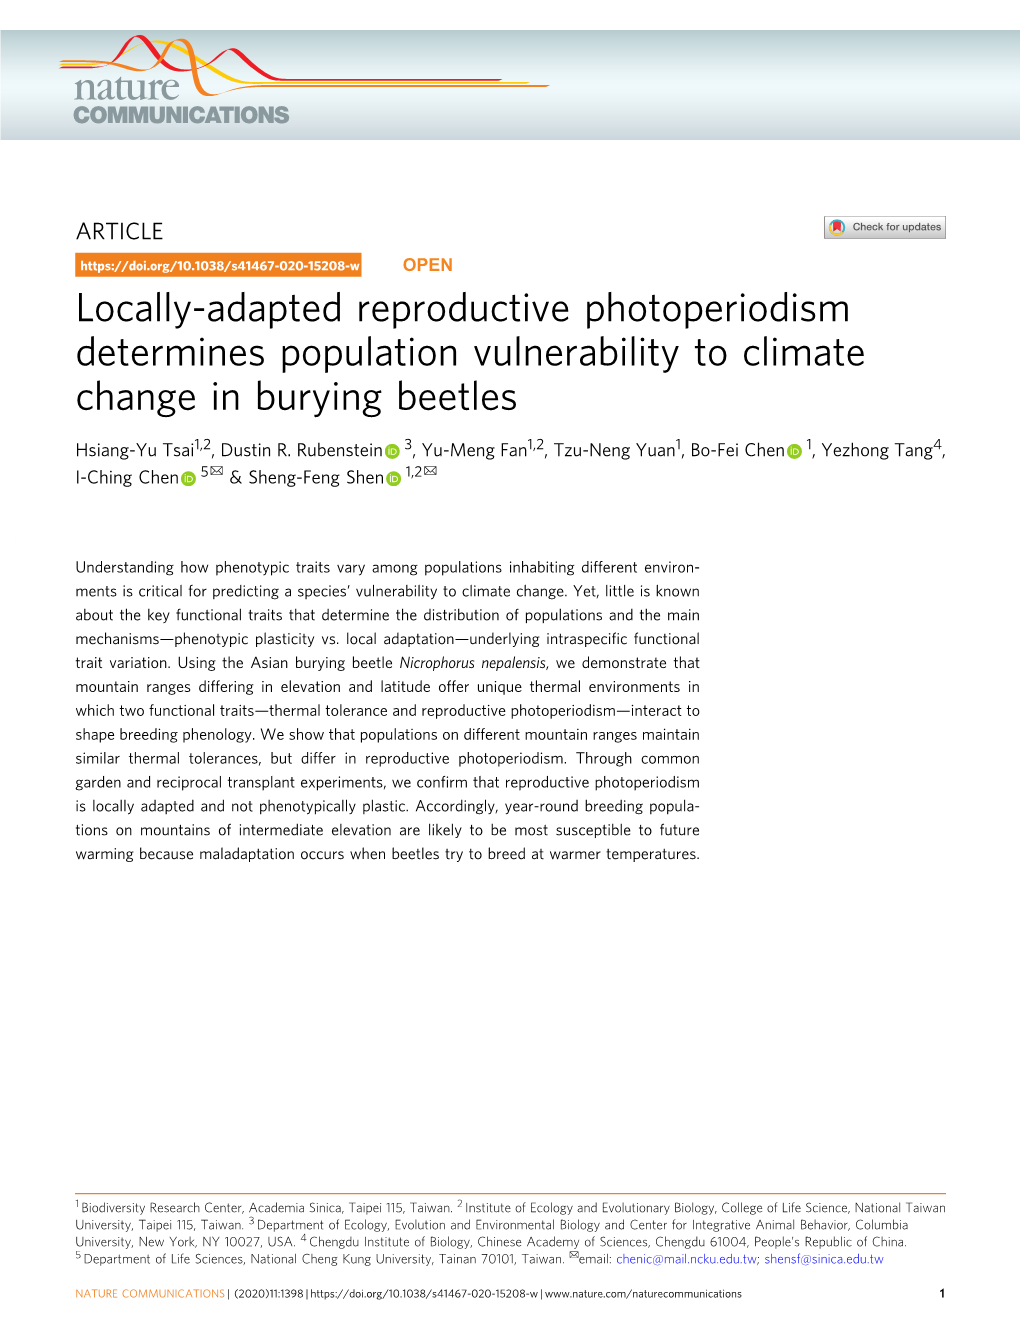 Locally-Adapted Reproductive Photoperiodism Determines Population Vulnerability to Climate Change in Burying Beetles